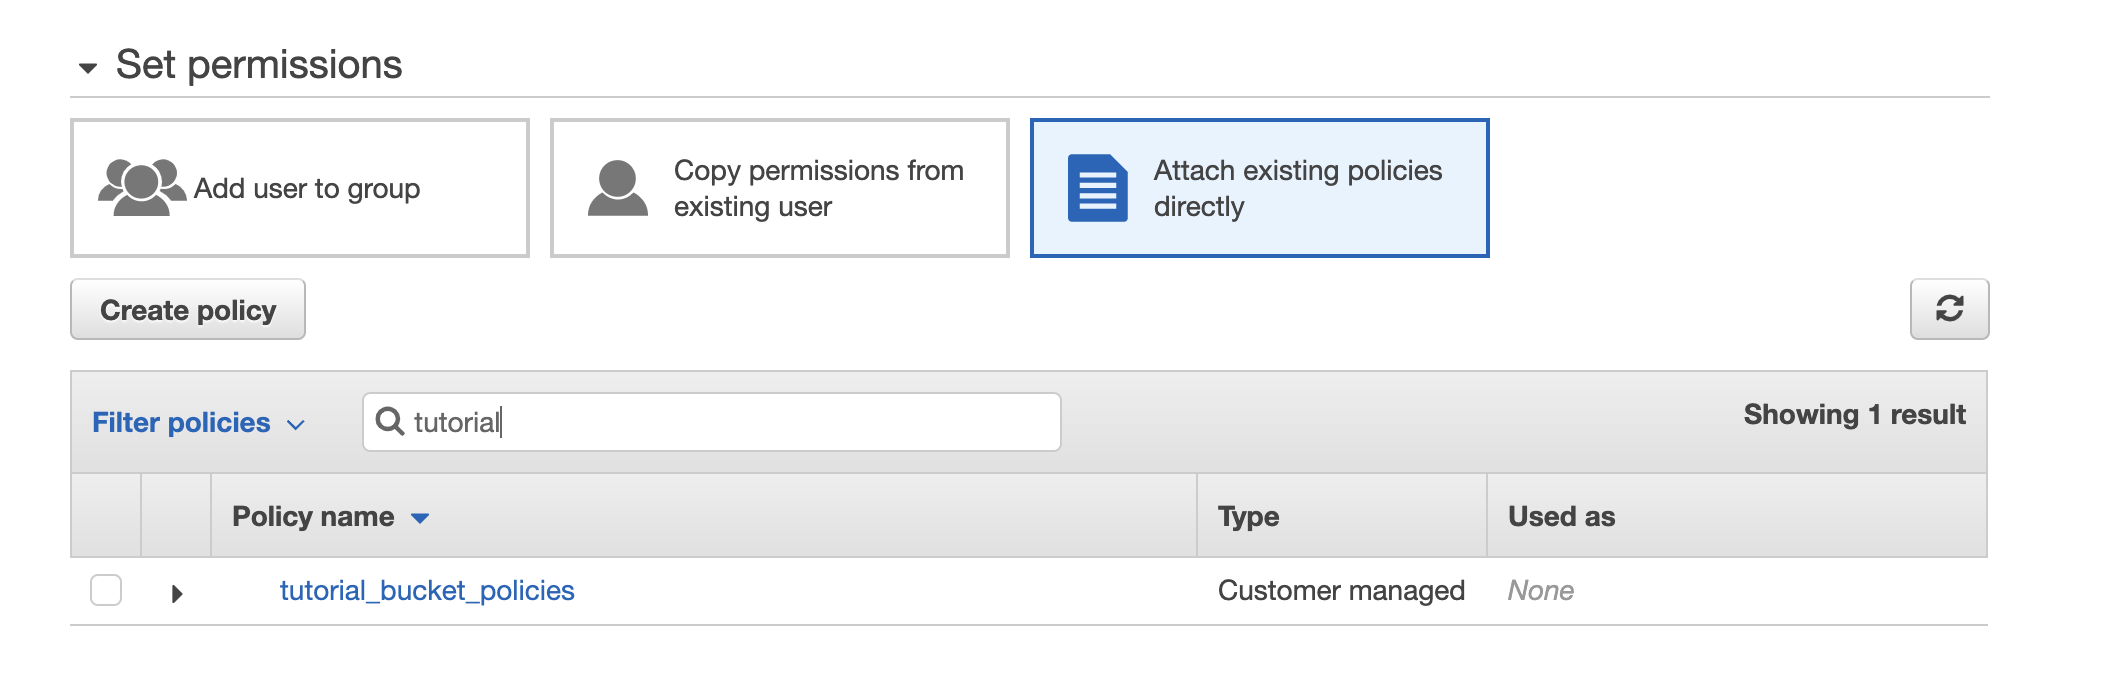 attach-existing-policies-directly